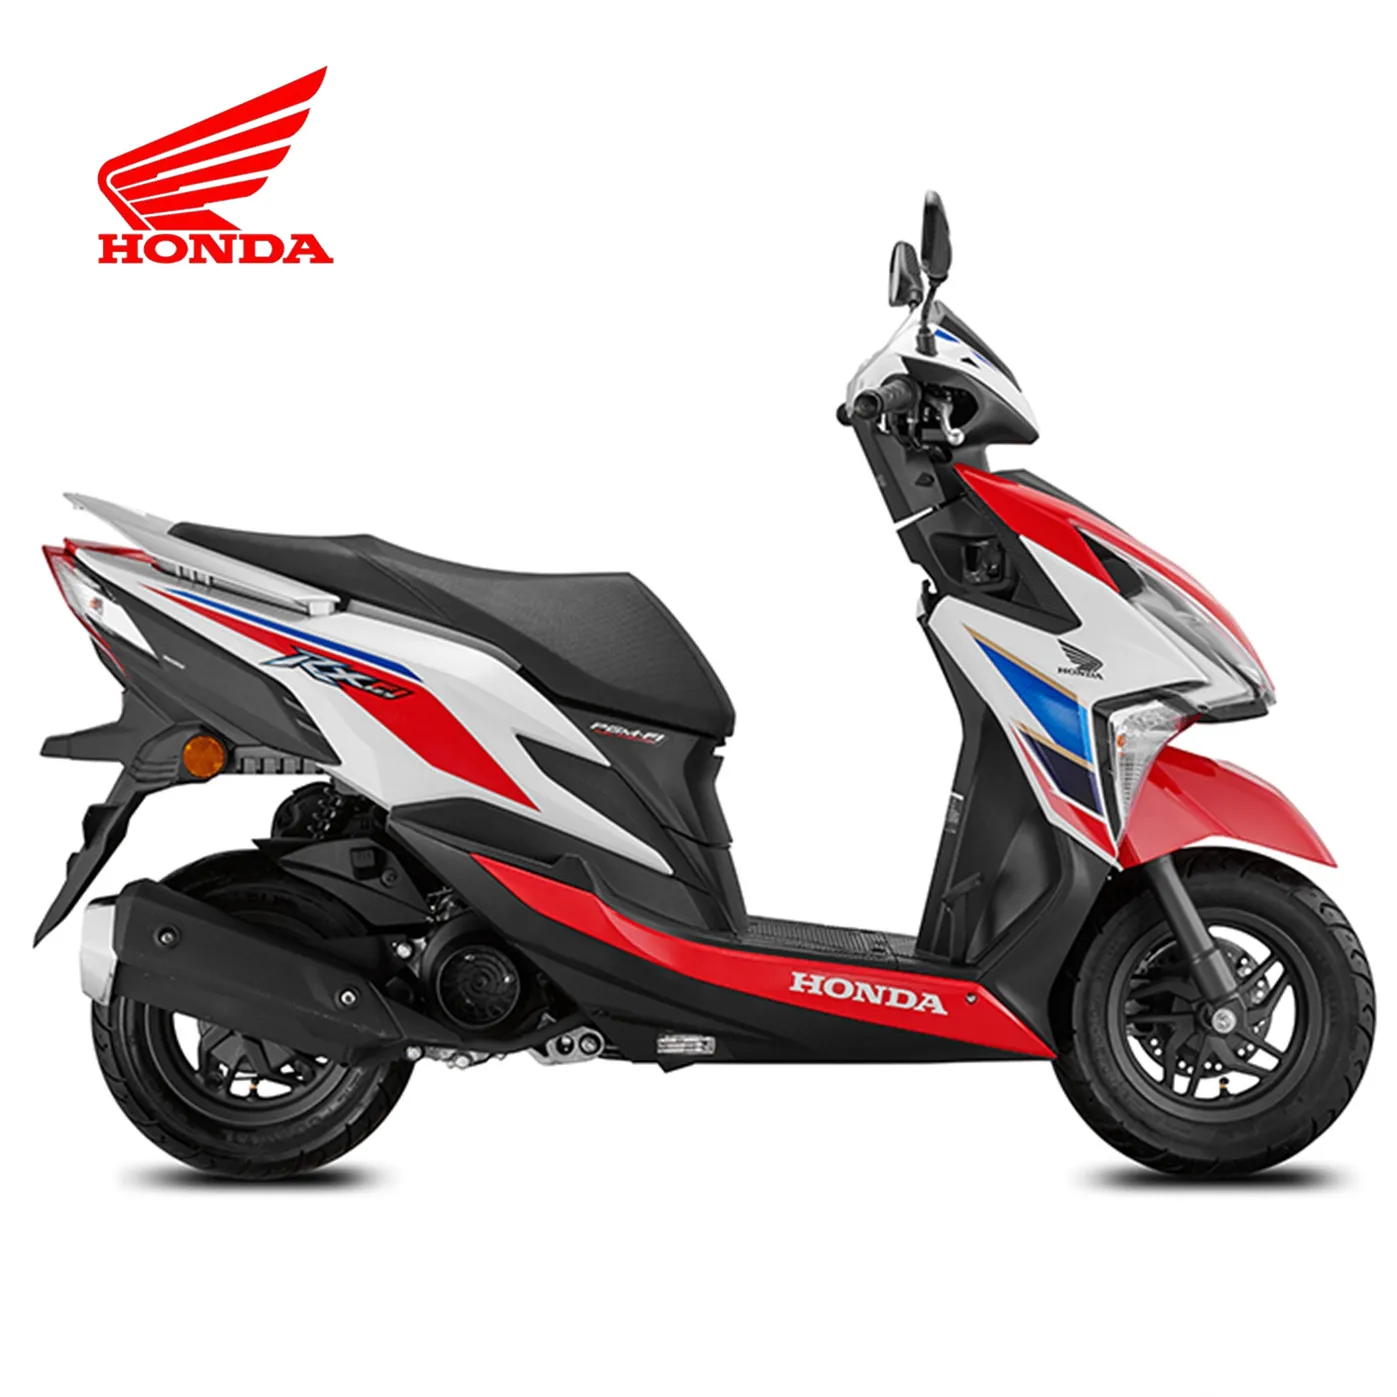 Brand New Honda Scooter Rx125 Elite Airblade Click Motorcycles